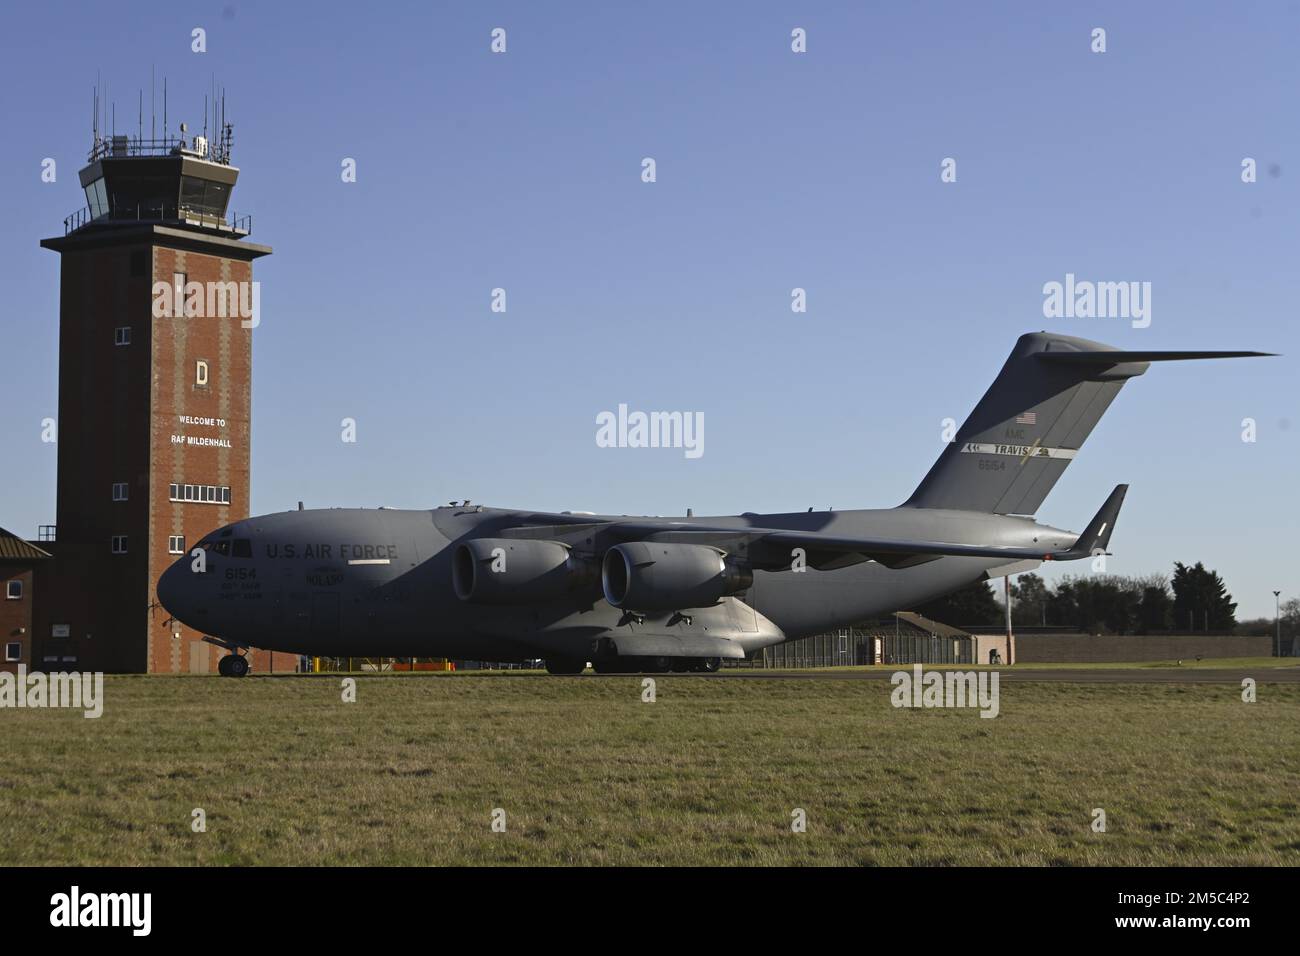 A U.S. Air Force C-17 Globemaster III aircraft assigned to the 60th Air Mobility Wing, Travis Air Force Base, Calif., taxis along the flightline after landing at Royal Air Force Mildenhall, England, Feb. 27, 2022. The aircraft landed at RAF Mildenhall after transporting cargo pallets to an air base in Norway. Stock Photo